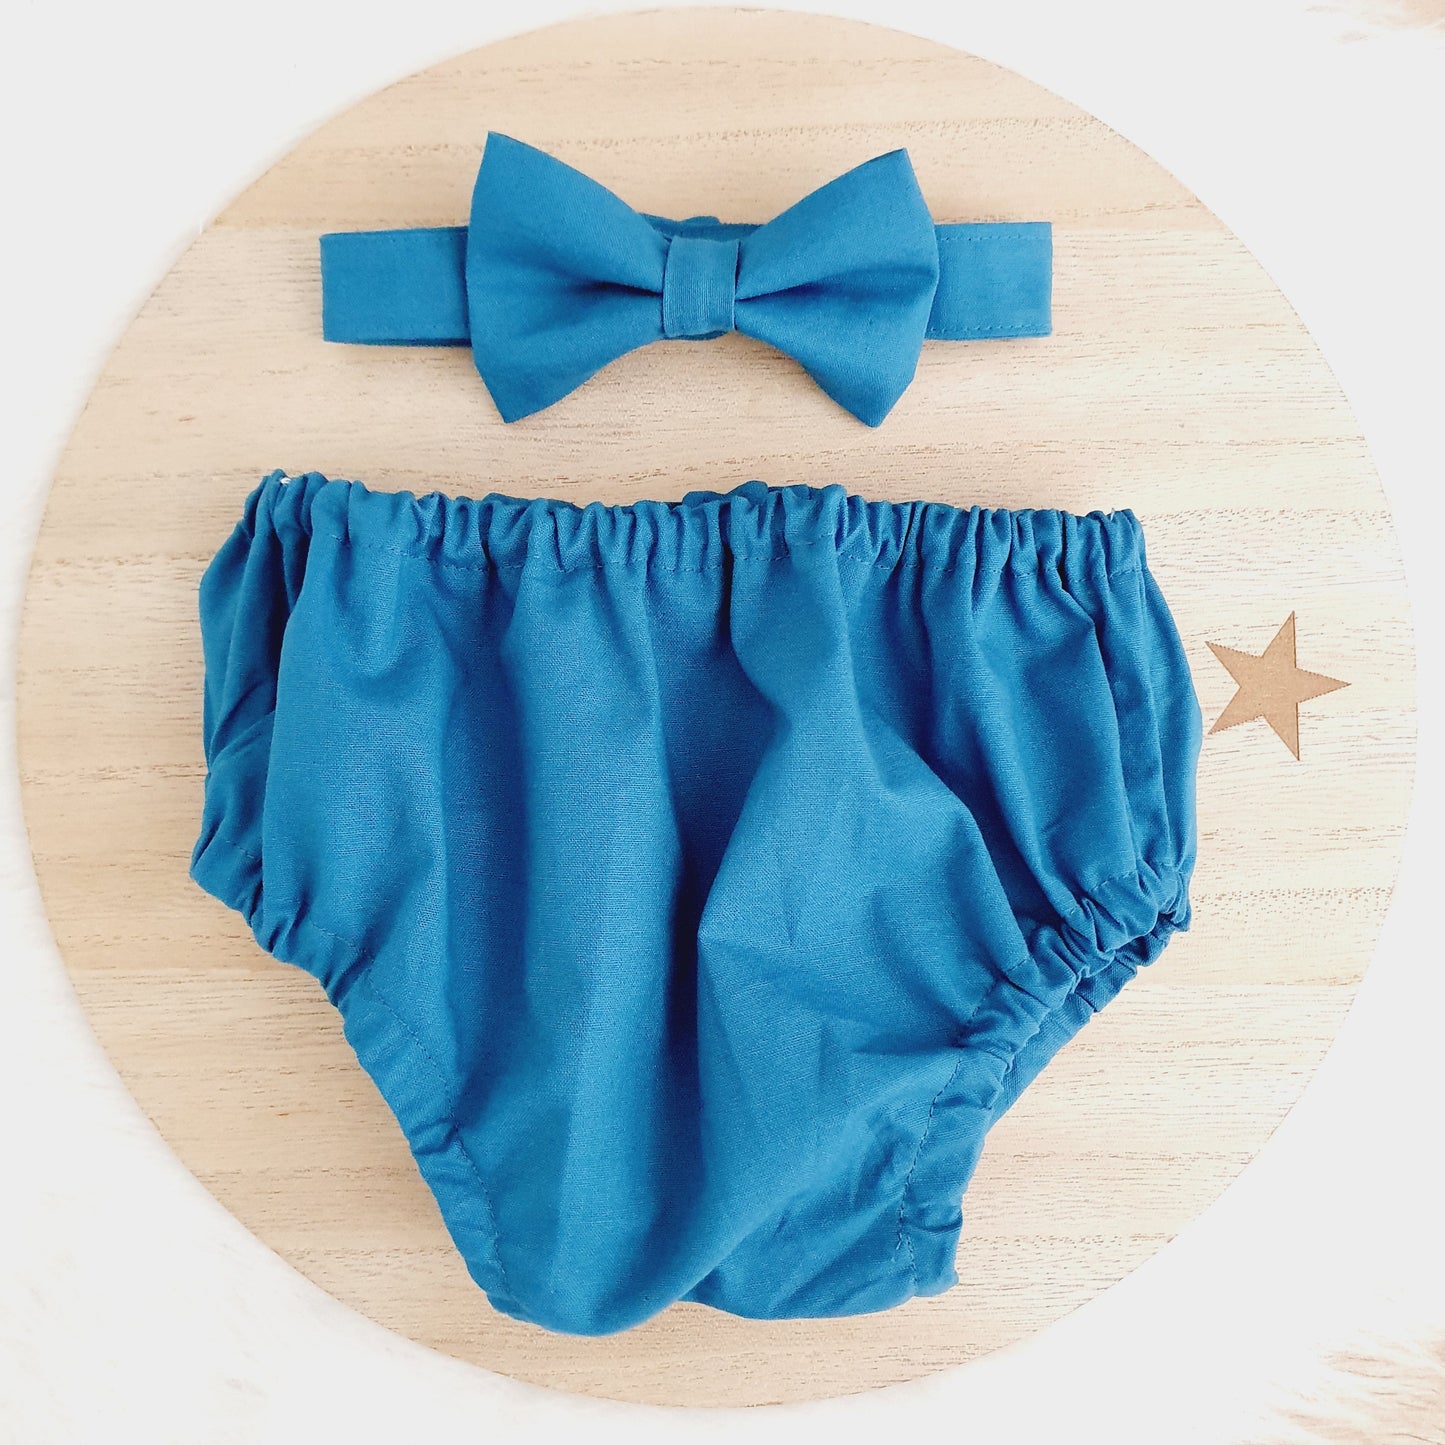 TEAL Boys Cake Smash Outfit, 1st Birthday, First Birthday Outfit, Size 0, 2 Piece Set